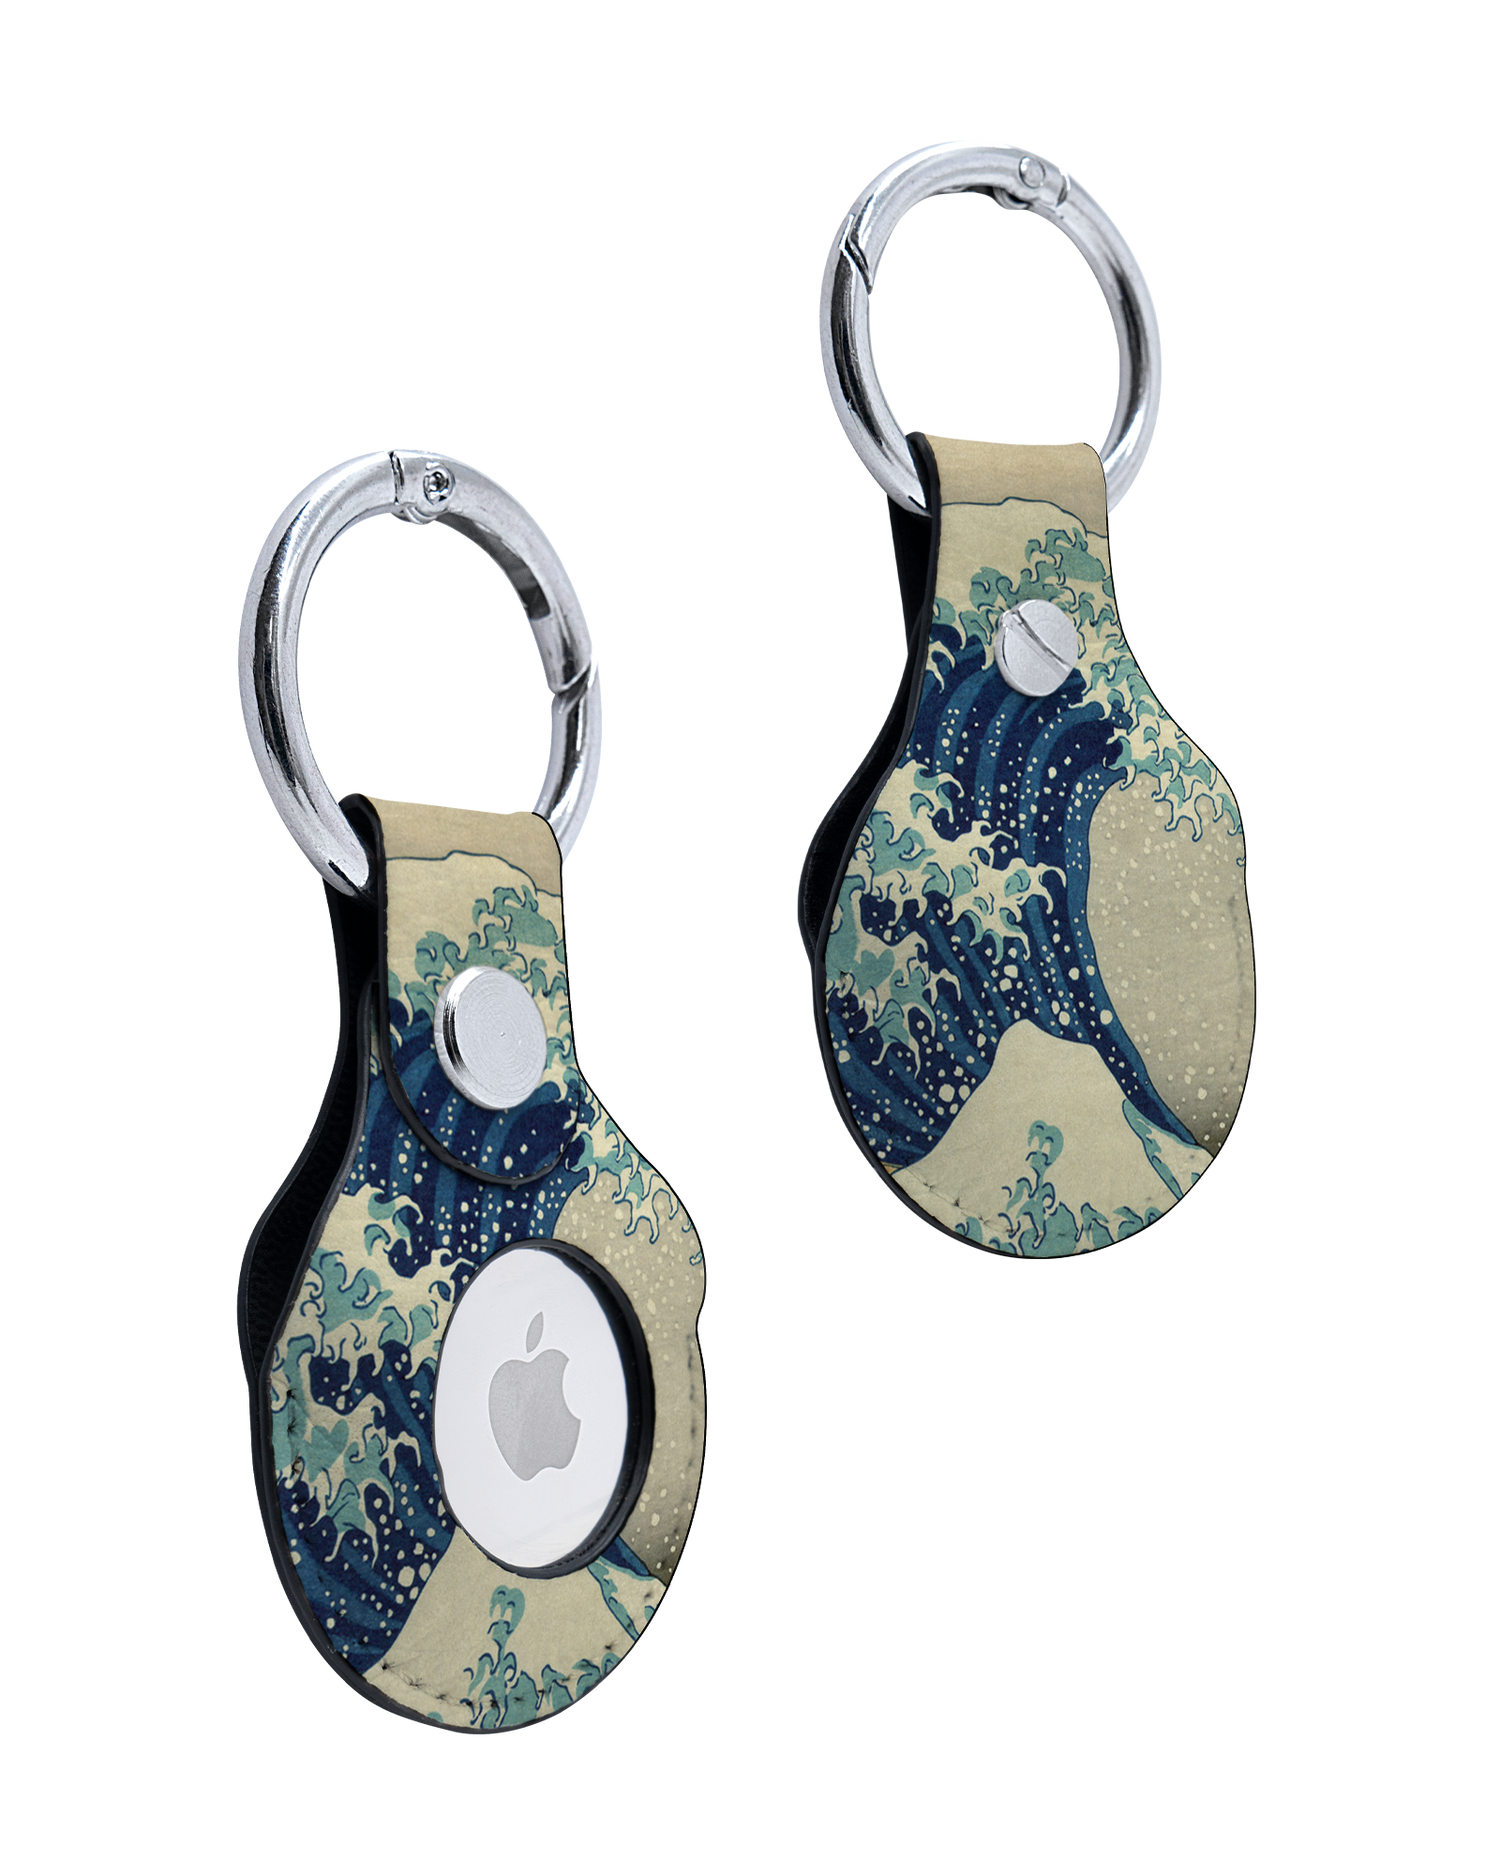 AirTag Holder with Great Wave Off Kanagawa By Hokusai Design: Front and Back